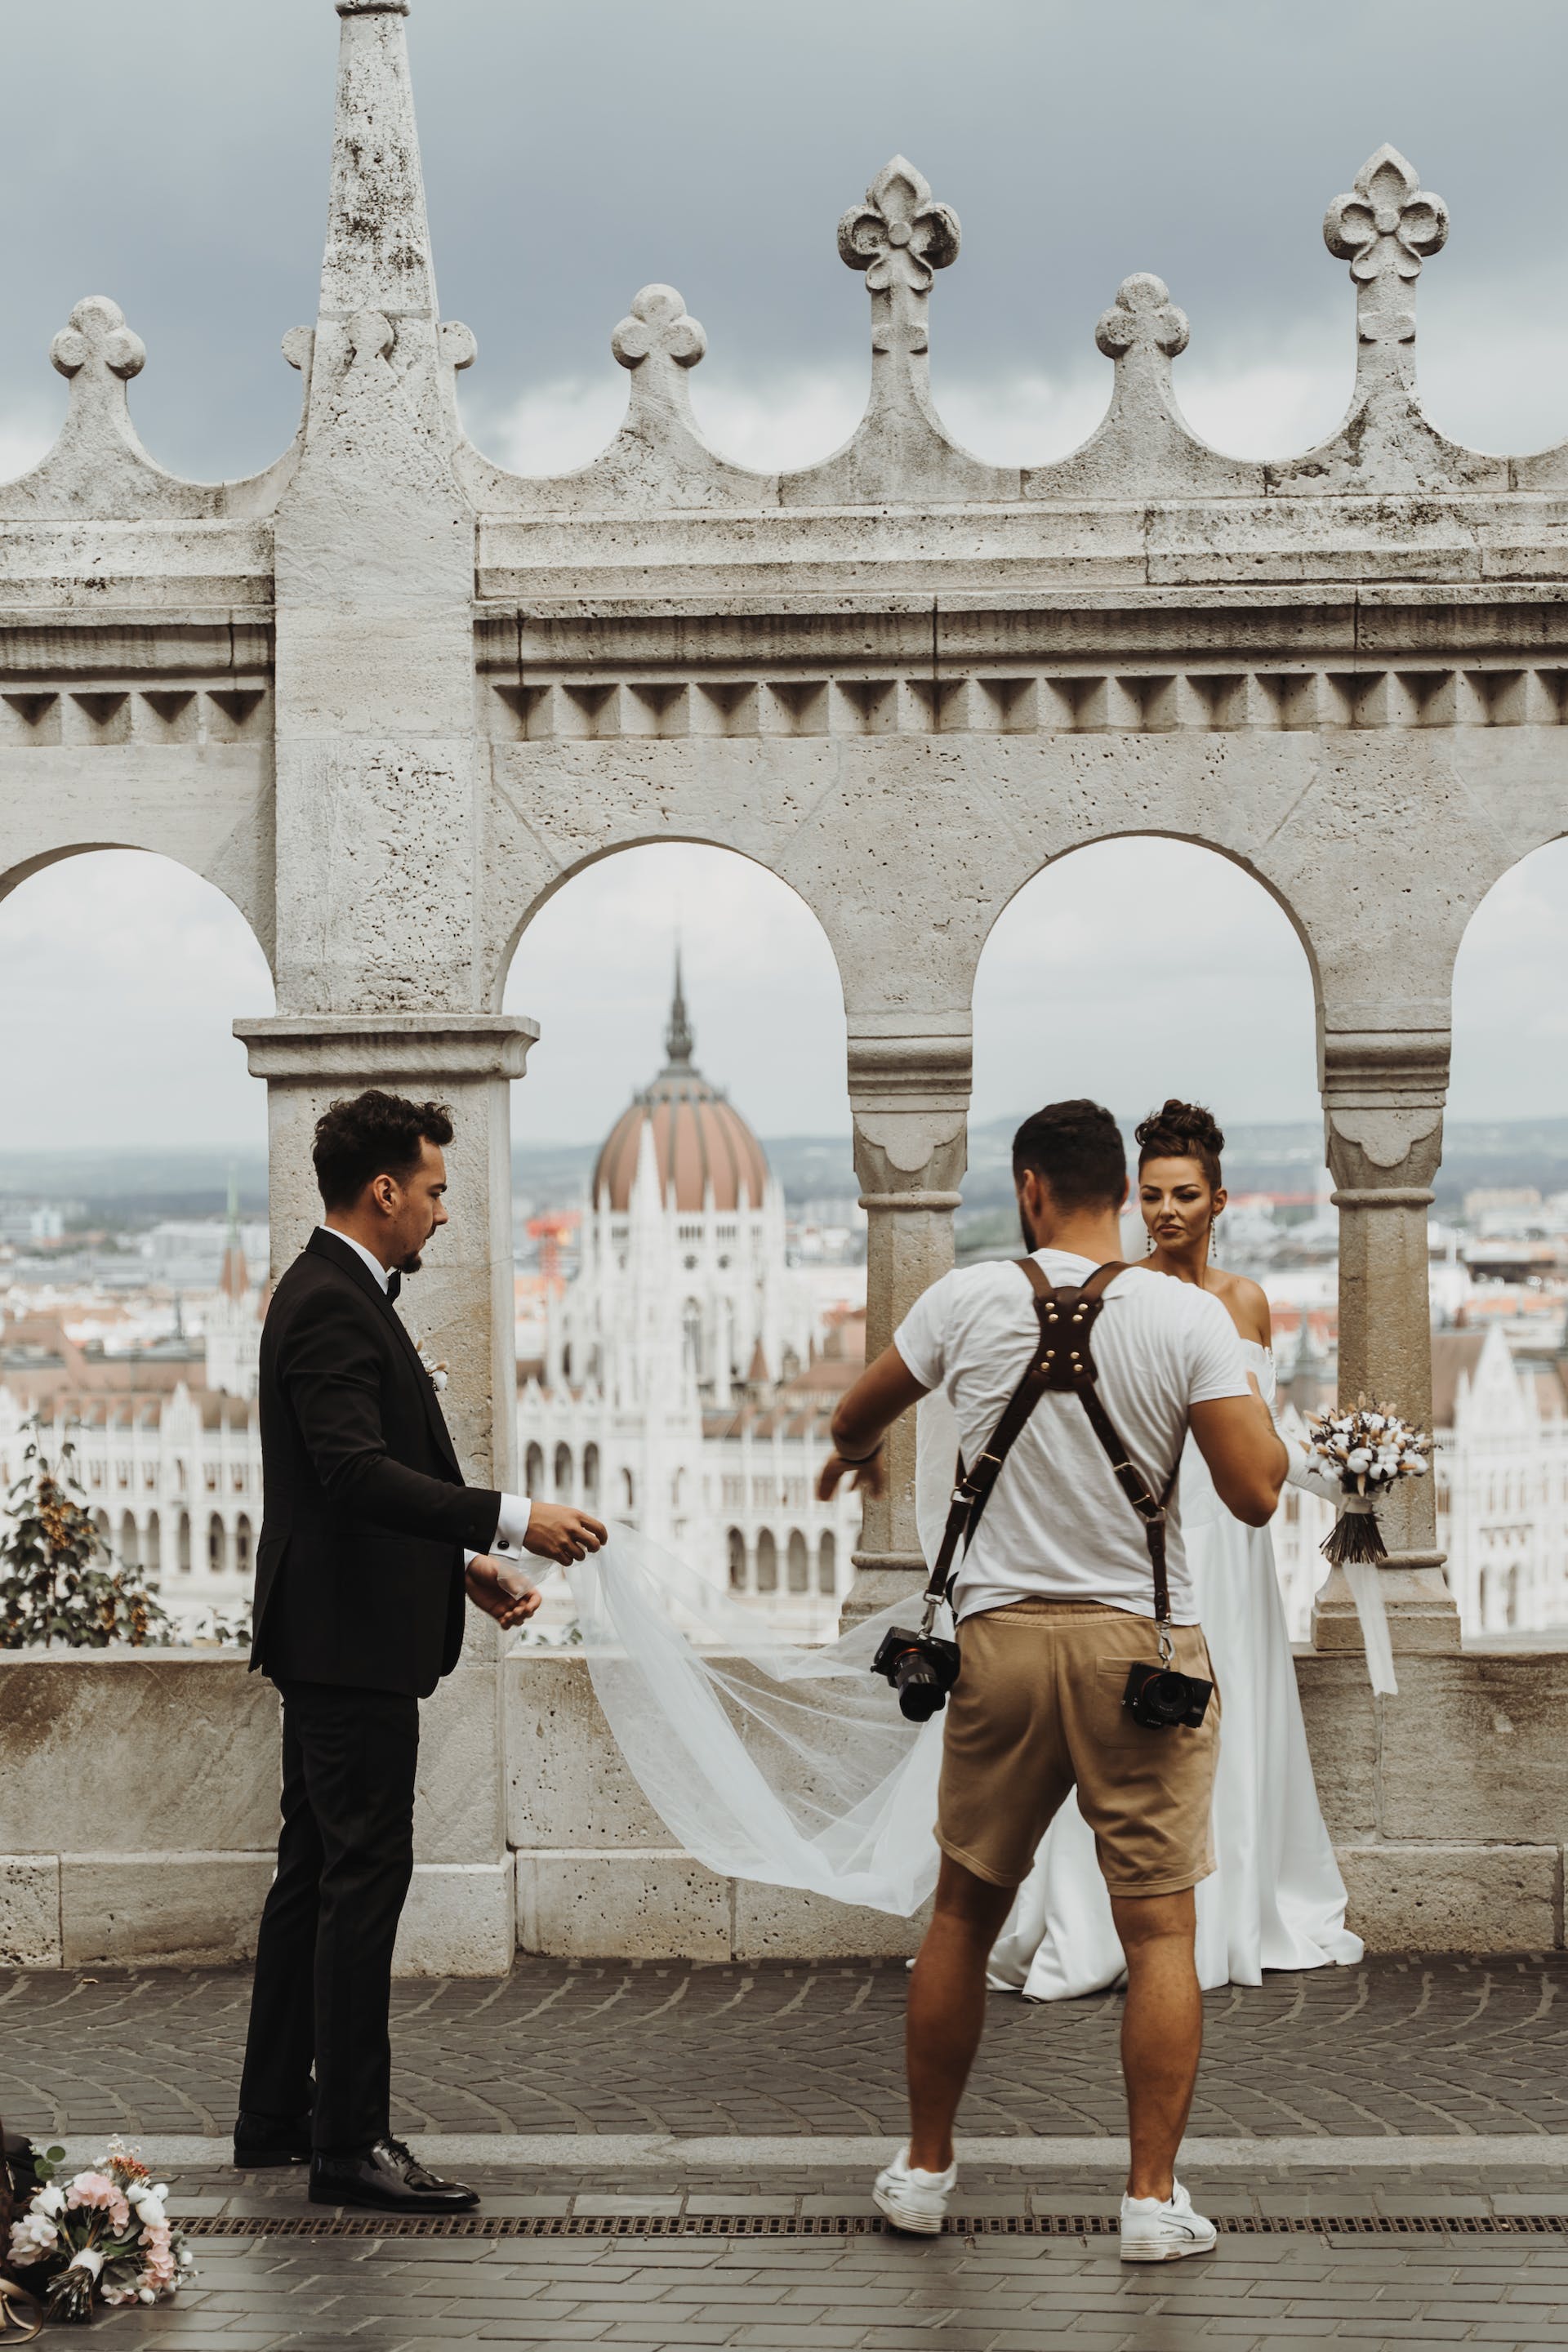 A wedding photographer taking a couple's photo | Source: Pexels